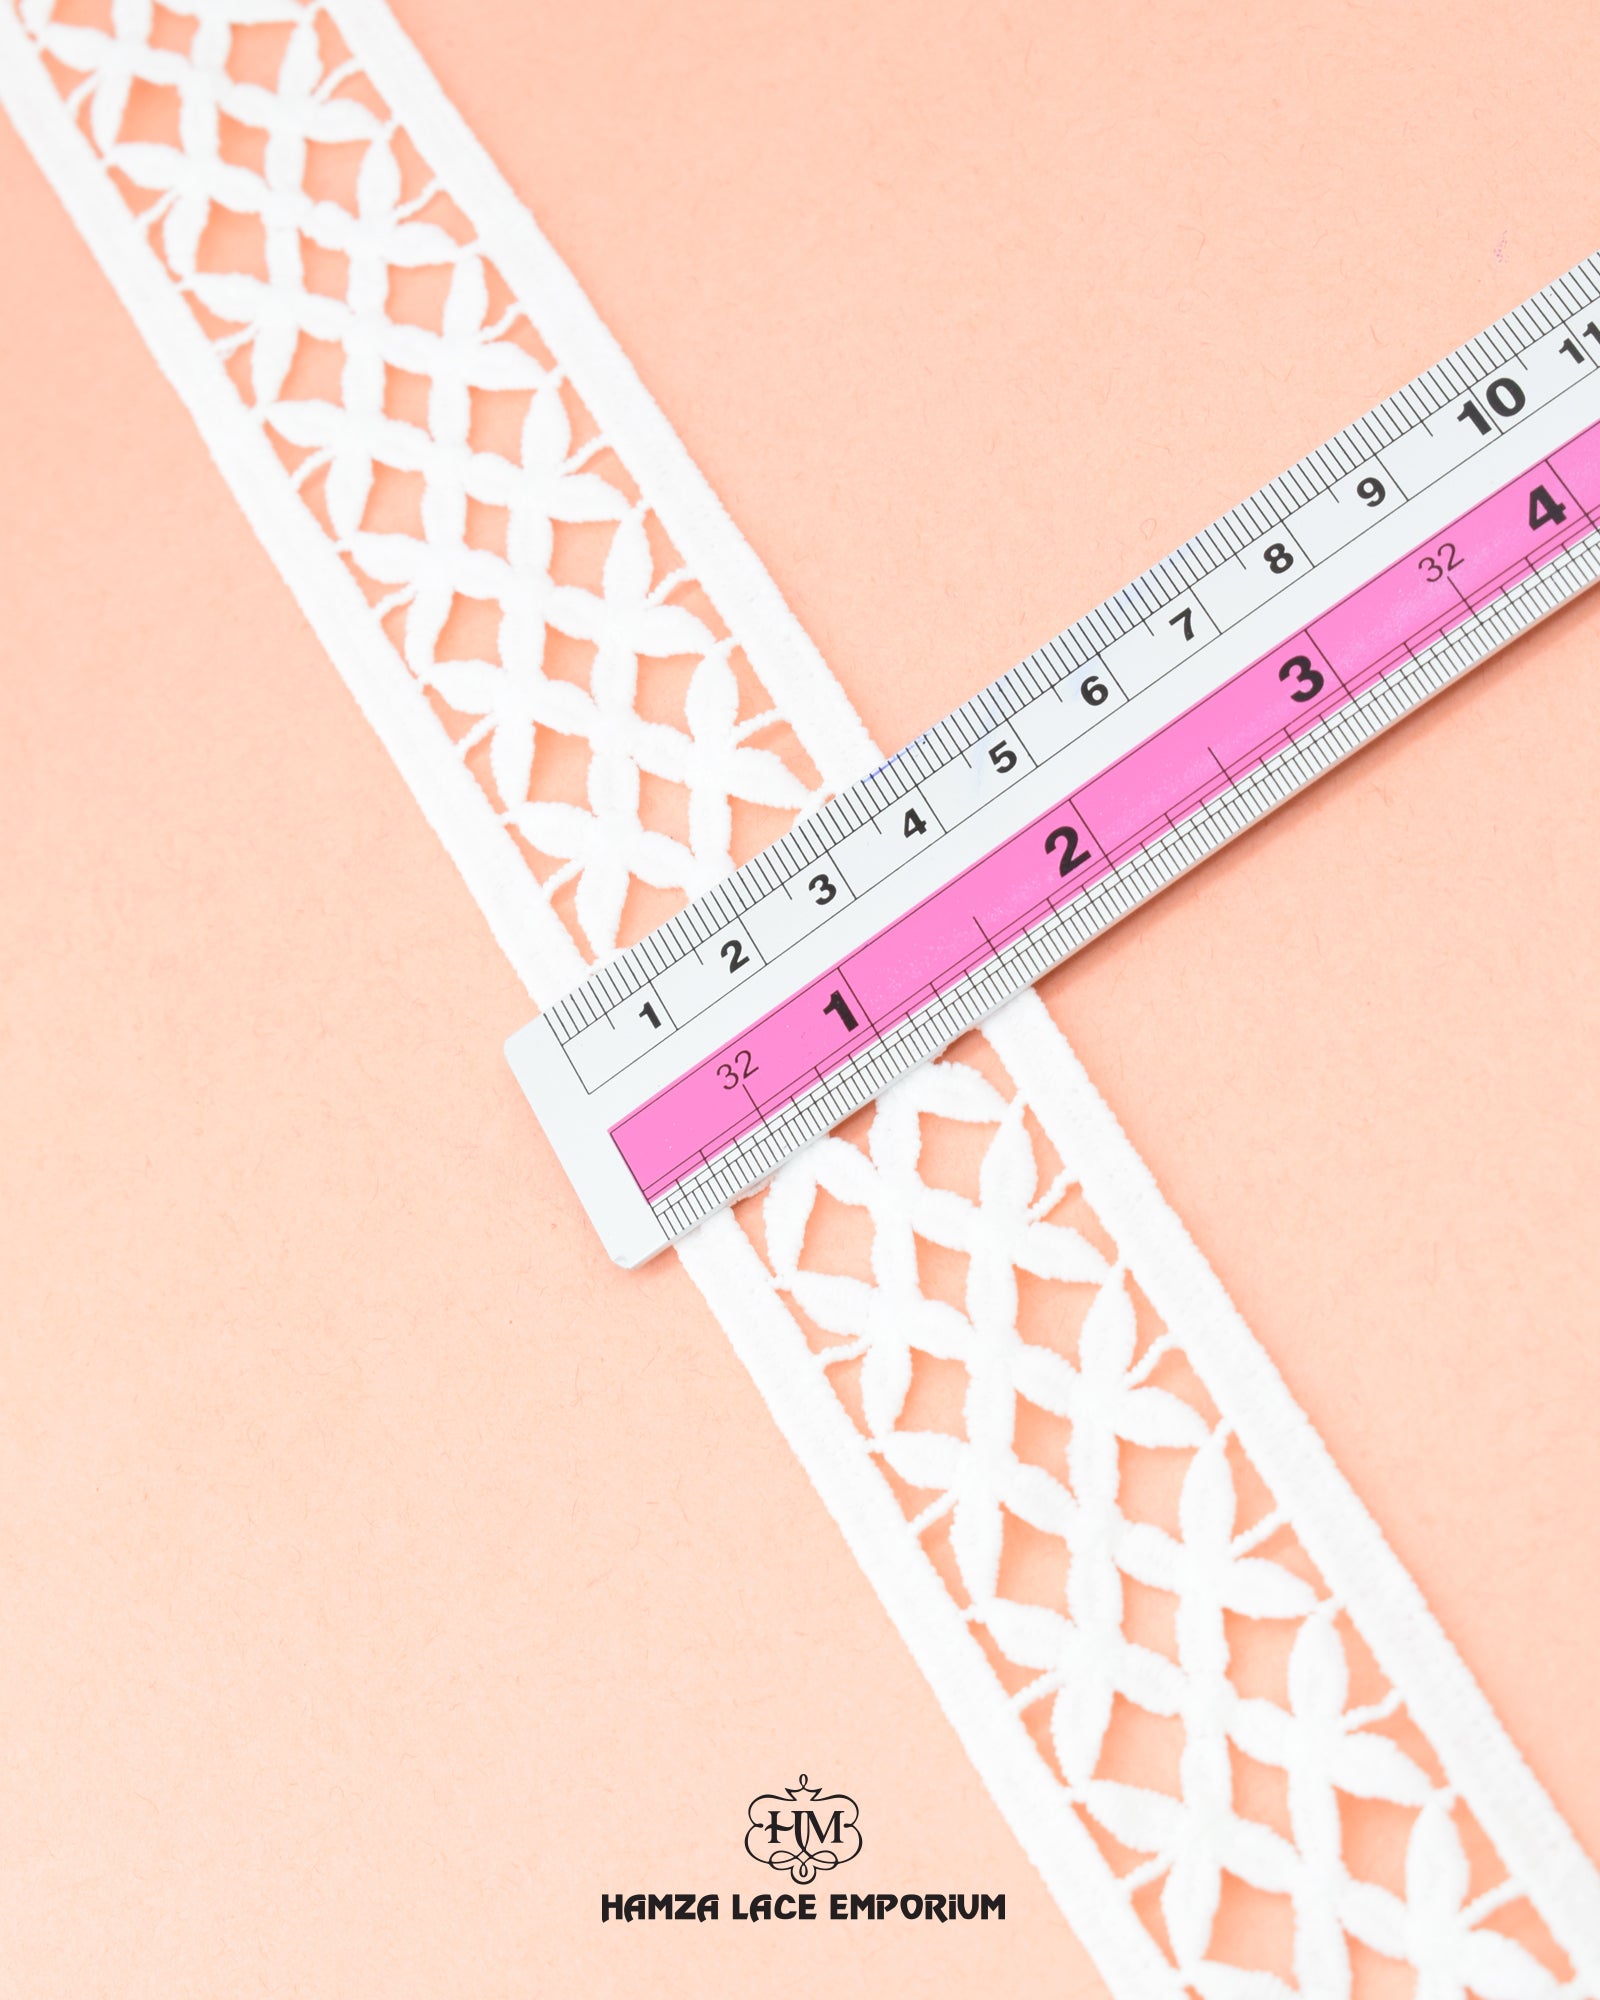 Size of the 'Center Filling Lace 21060' is shown as '1.5' inches with the help of a ruler